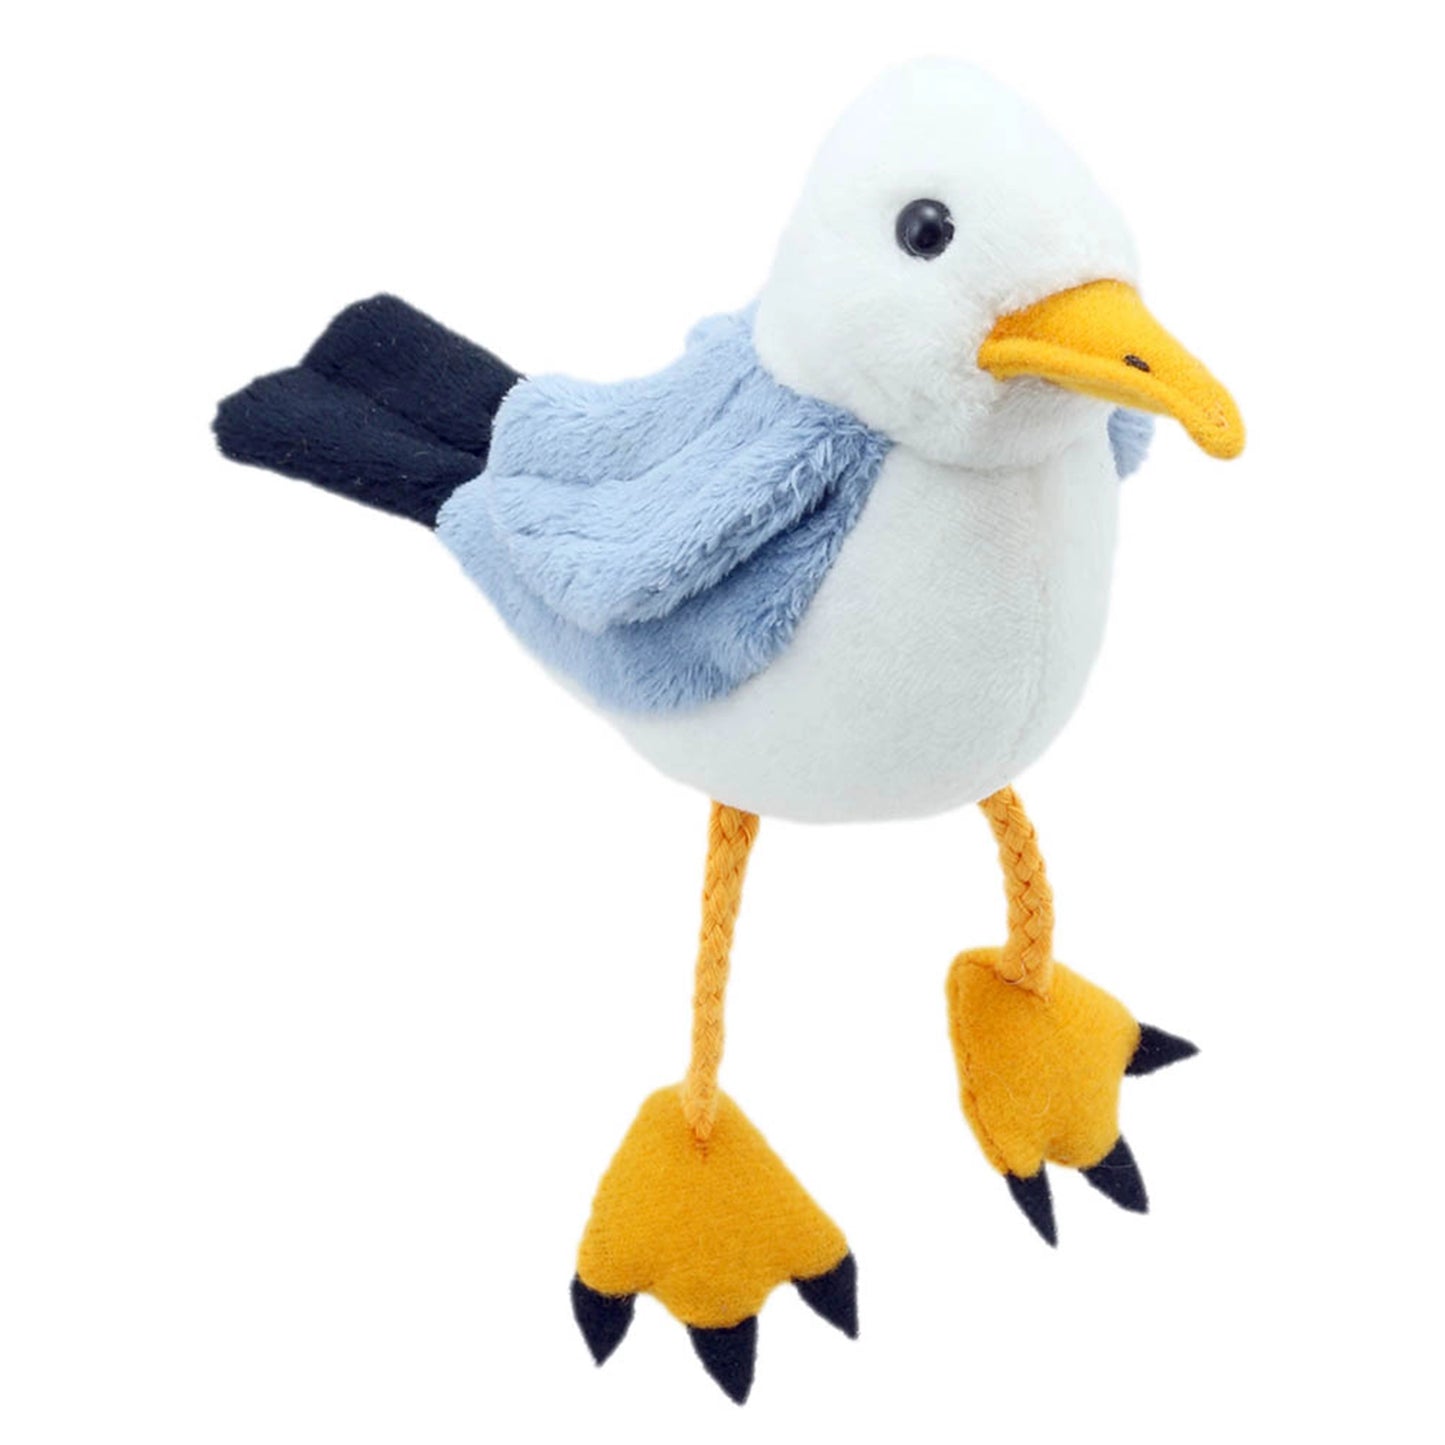 Seagull Finger Puppet - The Puppet Company - The Forgotten Toy Shop